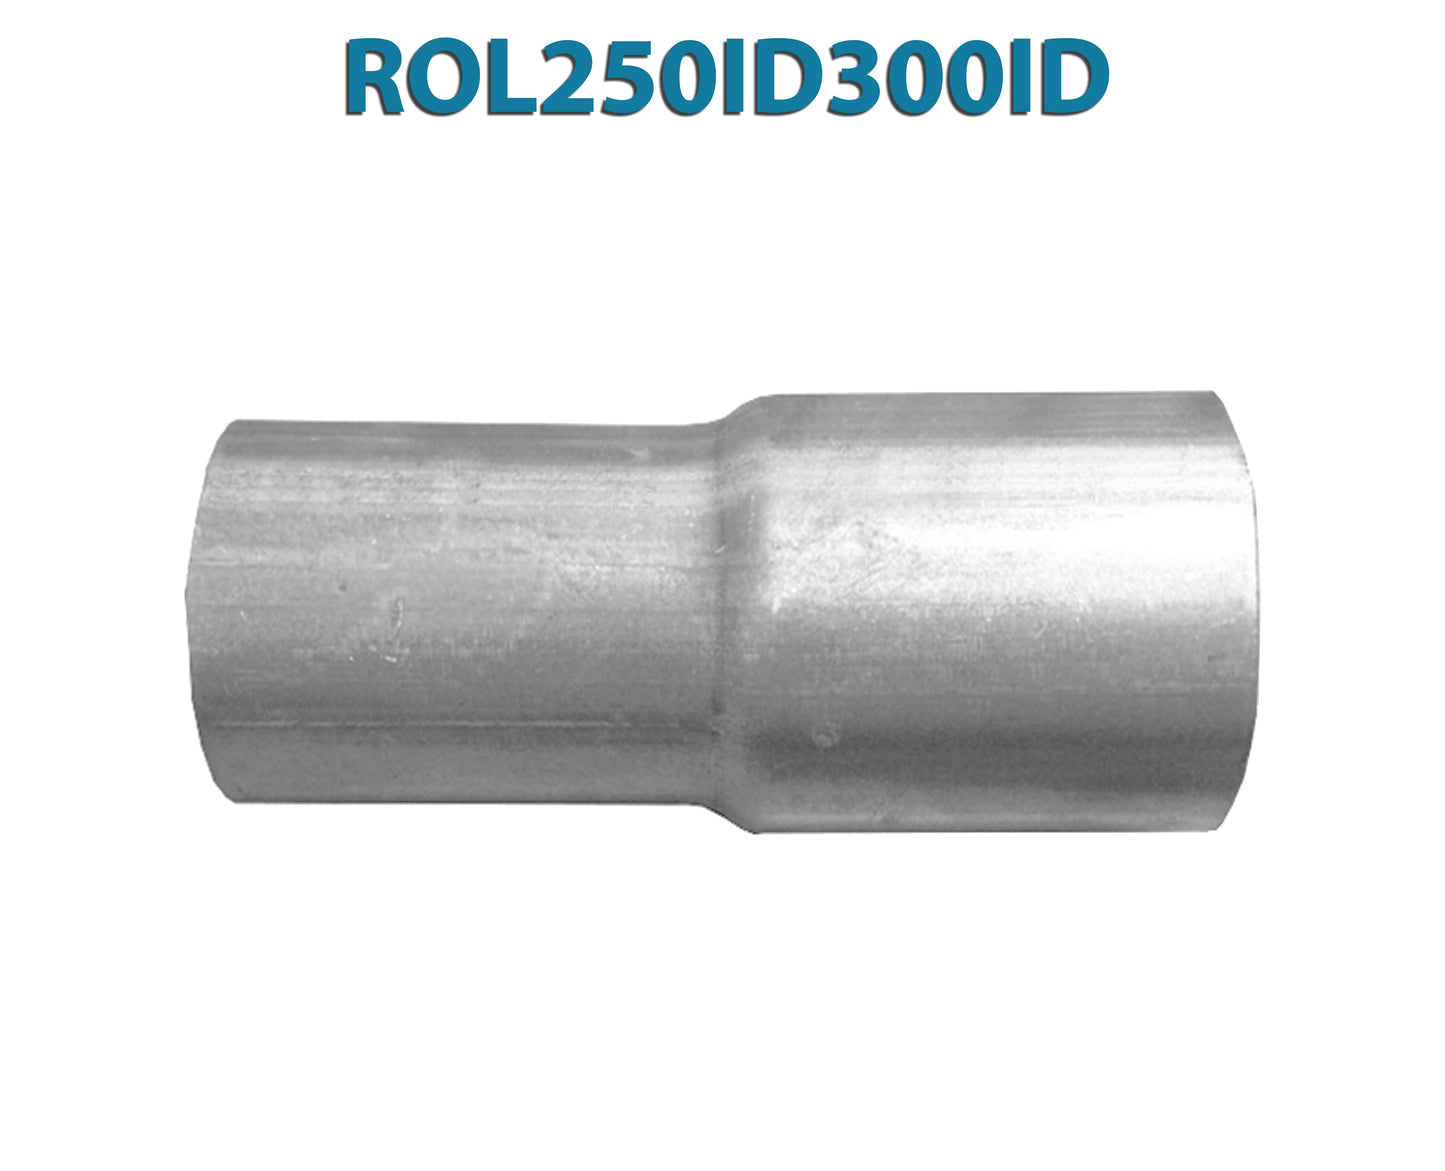 ROL250ID300ID 617579 2 1/2” ID to 3” ID Universal Exhaust Pipe to Pipe Adapter Reducer